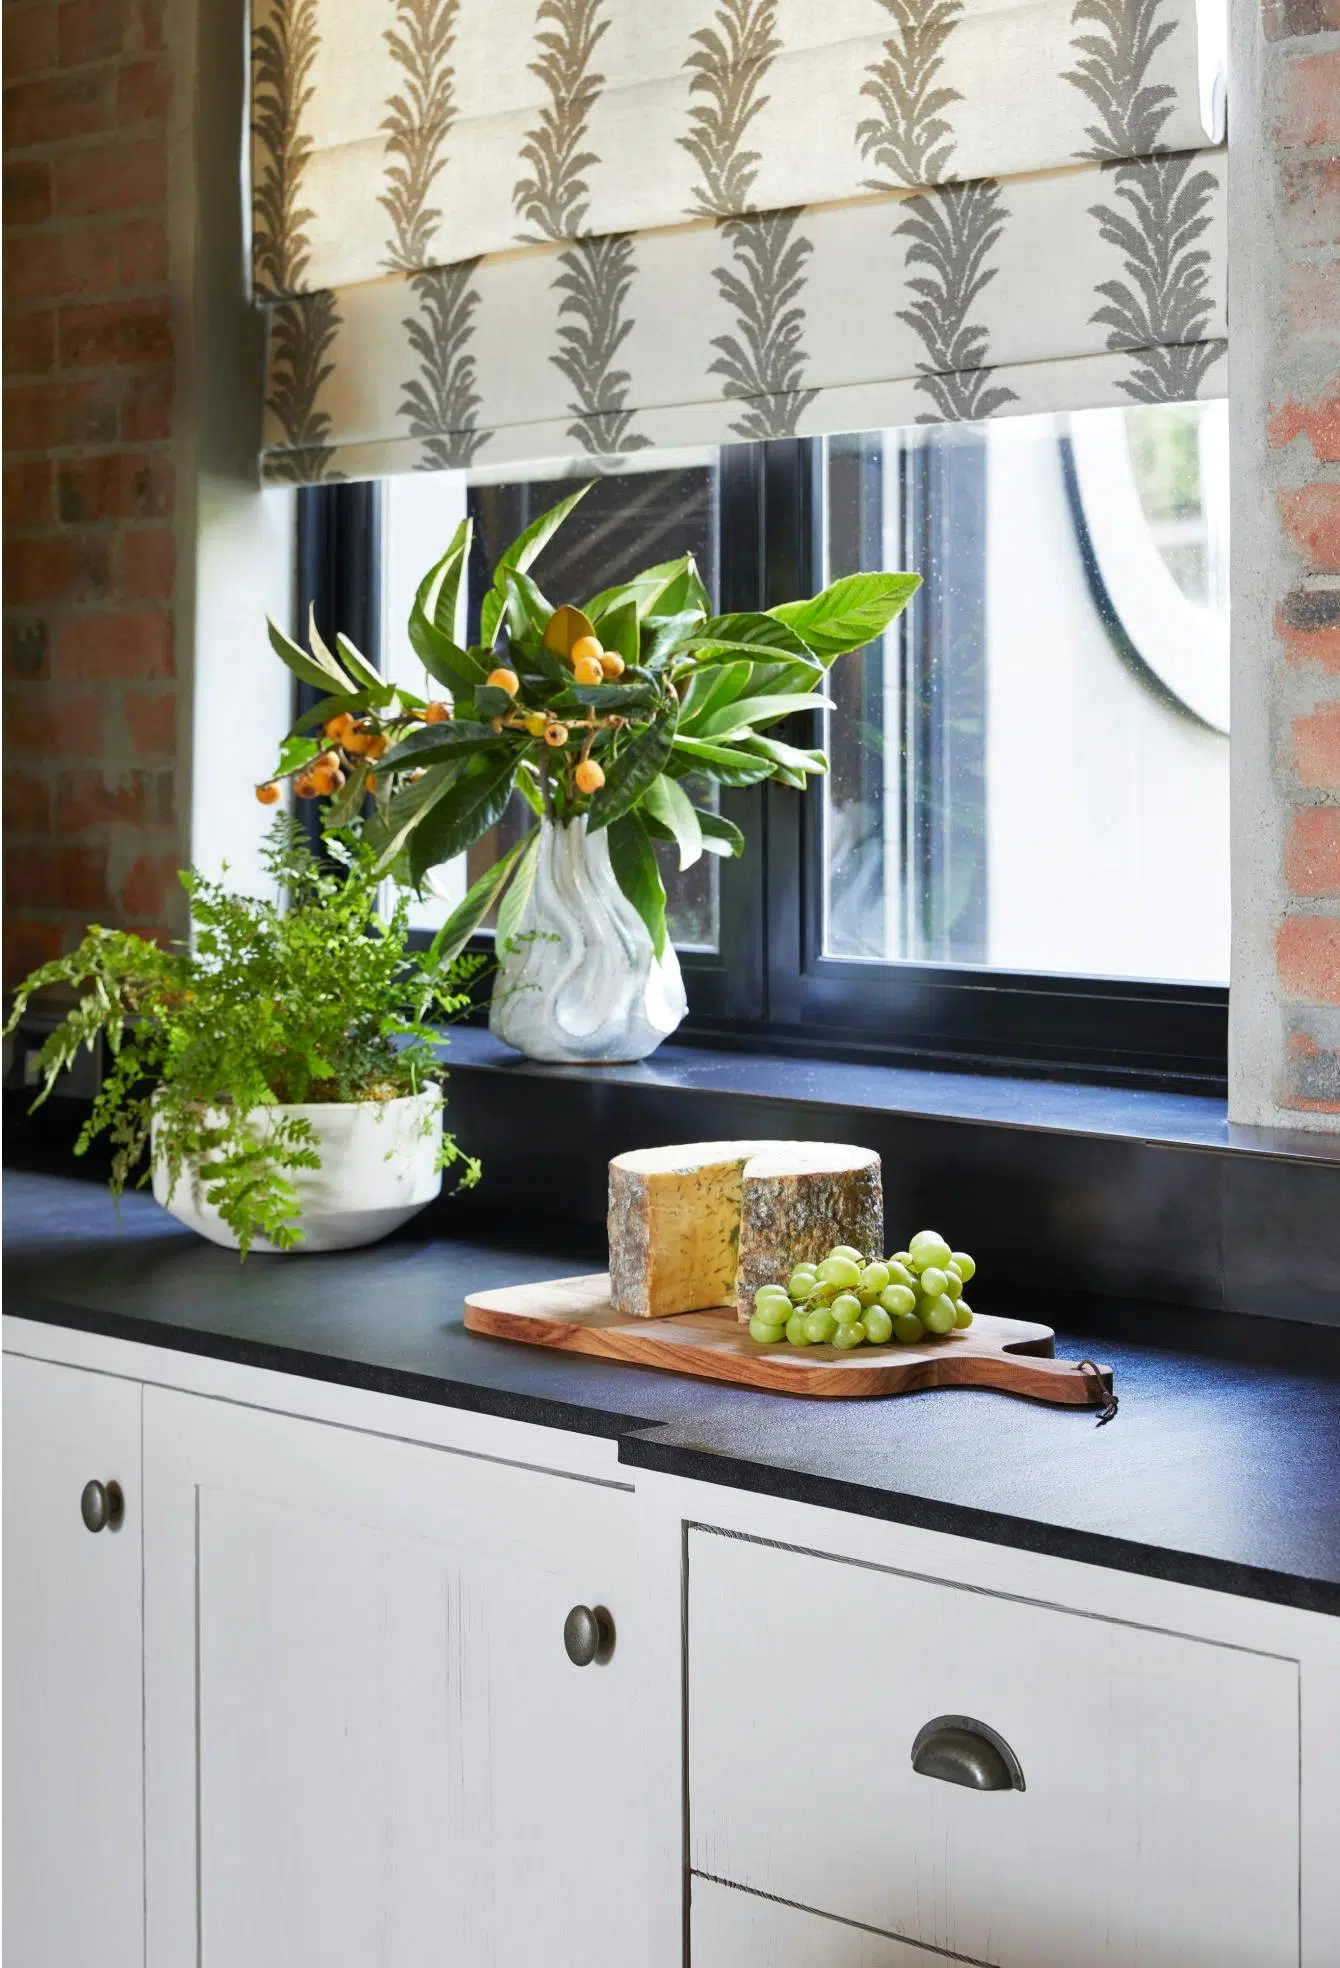 A black kitchen countertop holds a wooden board piled with green grapes and a large wheel of cheese. Behind this is a window draped with blinds in a stylised, botanical pattens, and on the counter and windowsill are a white planter holding greenery and a white organic-shaped vase holding loquat fruit and leaves